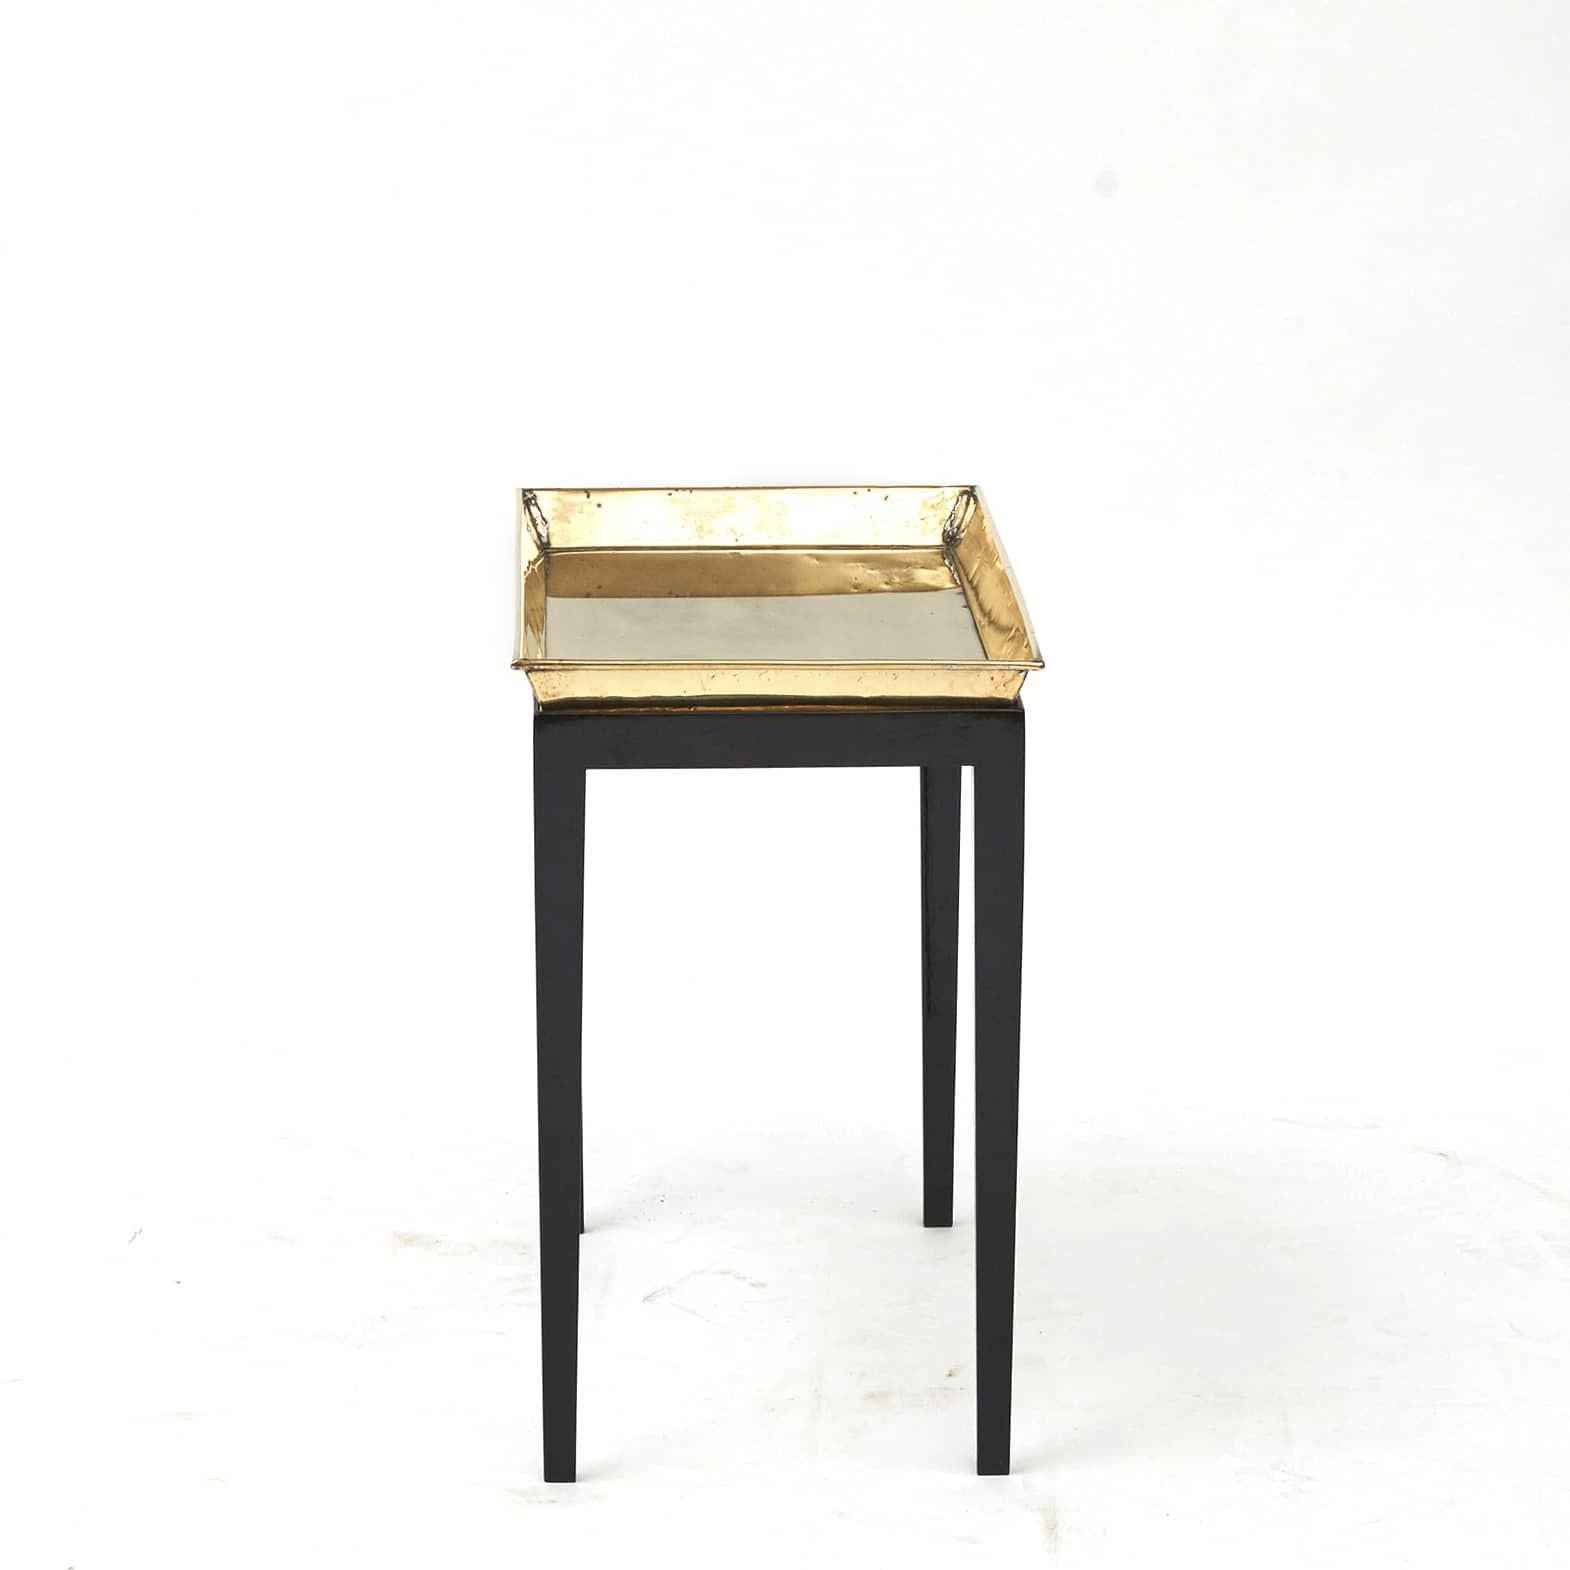 Side table with brass tray (loose) on black lacquered wooden stand.
Denmark approx. 1950.